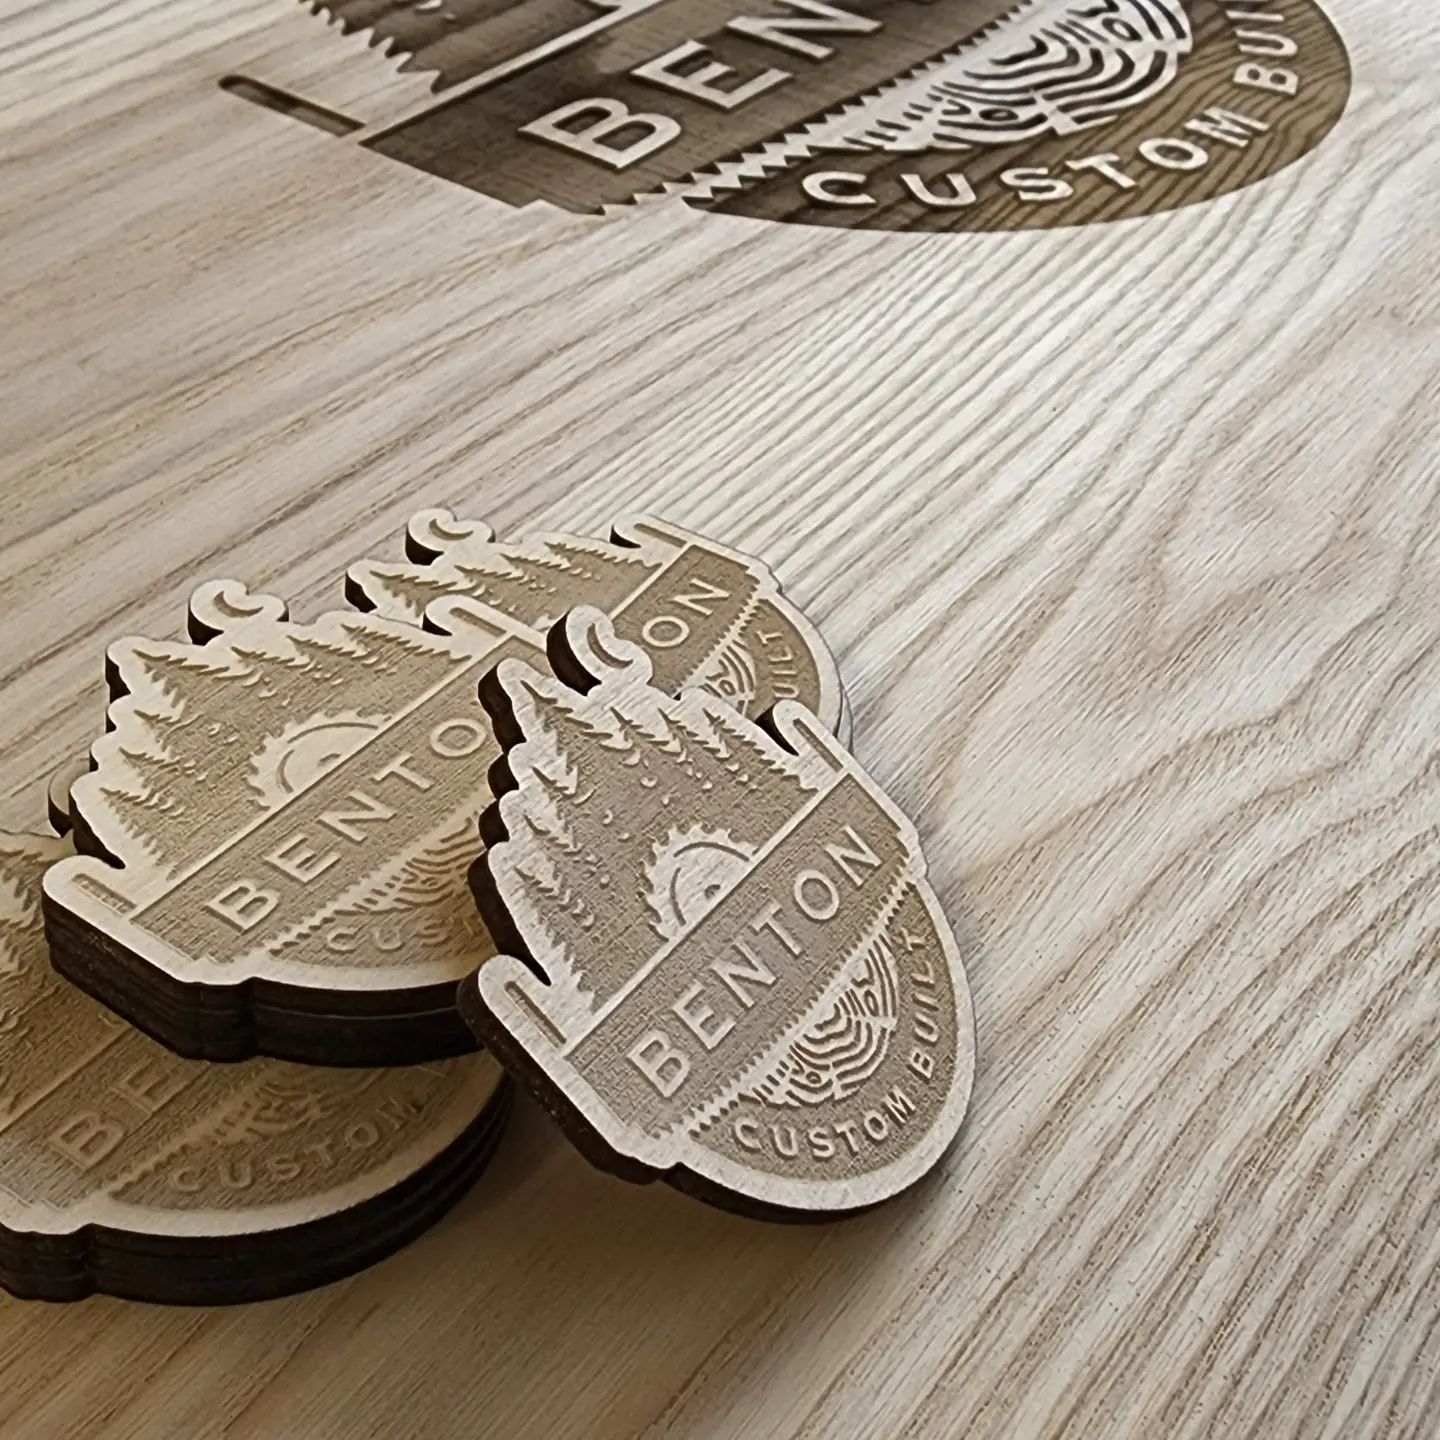 Need furniture tags for your projects? Just let me know. I recently did some laser work for @bentoncustombuilt19 and everything turned out great! 

#lazylabacres #laserengraving #furnituretags #woodworking #repyourbrand #smallbusiness #maker #woodgrain